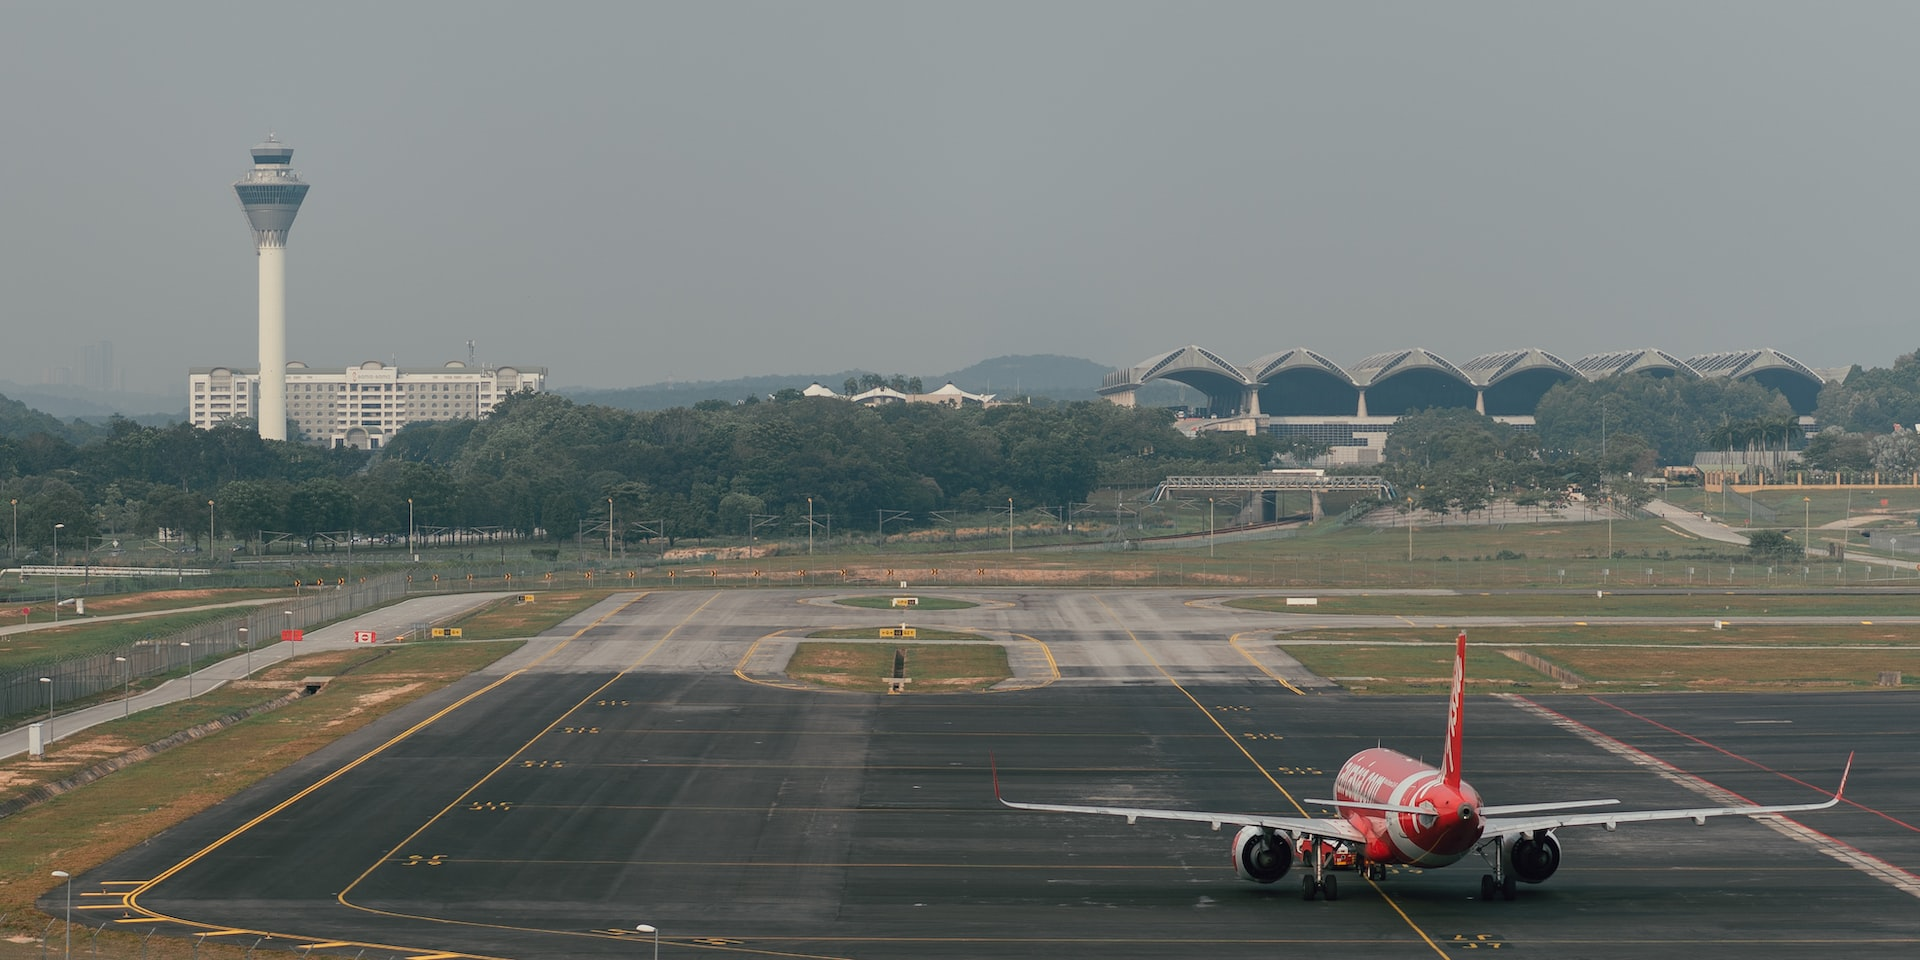 An aircraft following continuous taxiway markings.